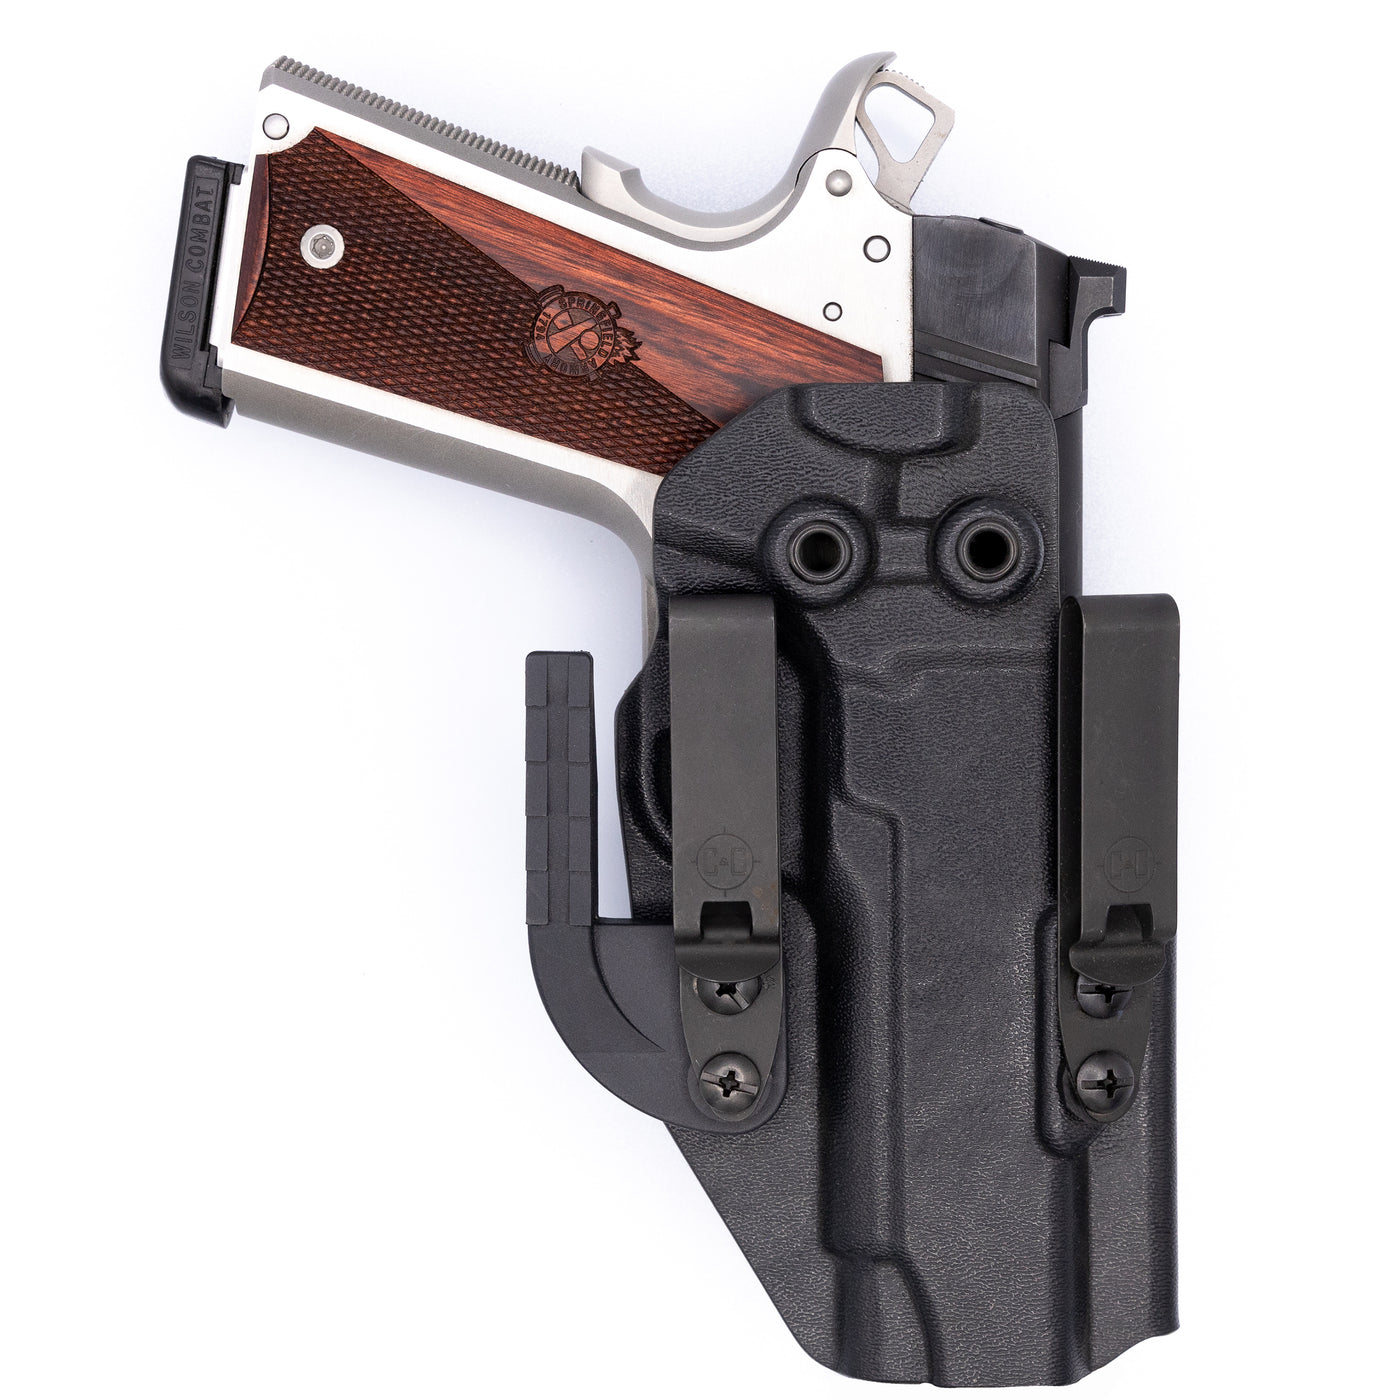 This is the quickship C&G Holsters Alpha upgraded inside the waistband holster for a 1911 4.25". 